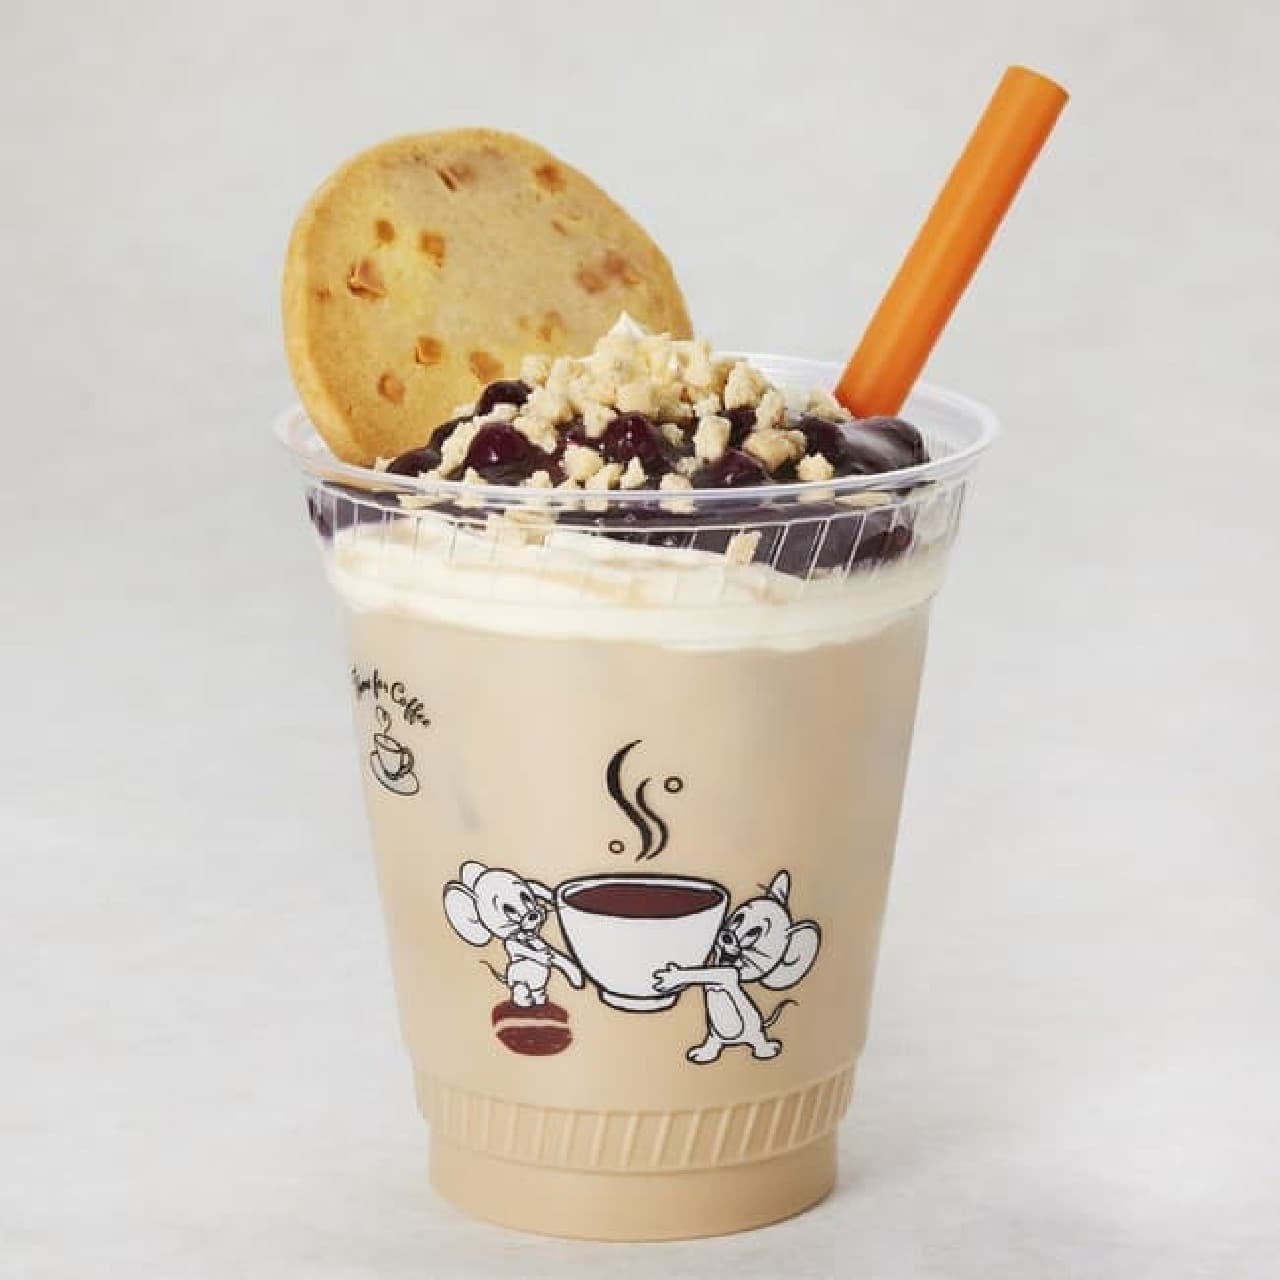 Tully's "Tom and Jerry Blueberry Cheesecake Latte"